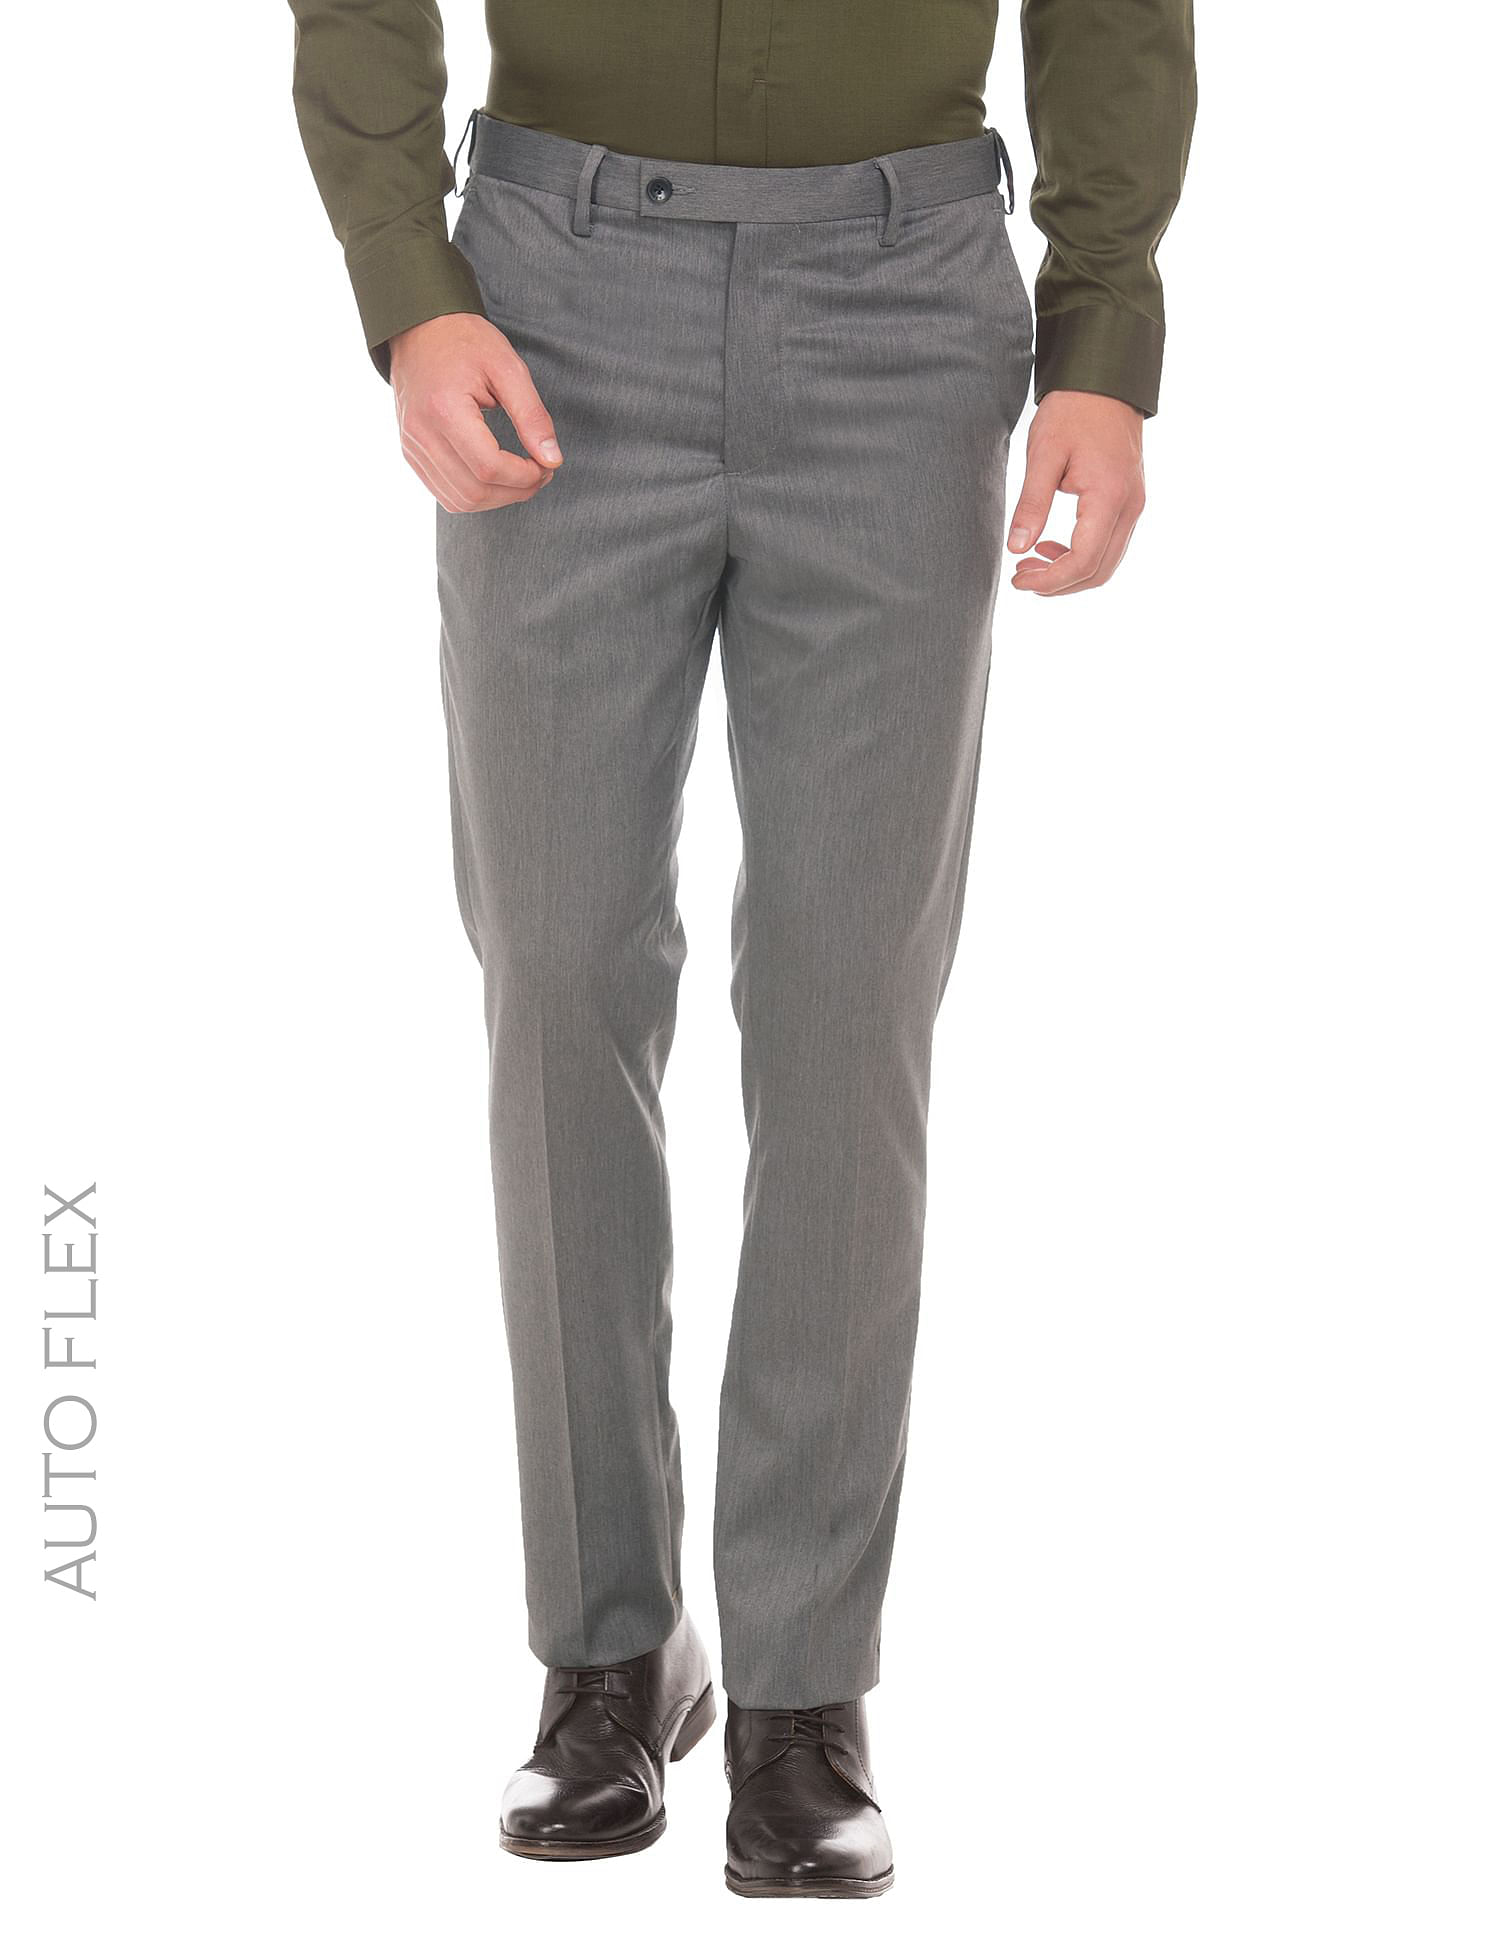 Men's Beige Tapered Fit Formal Trousers at Rs 920.00 | New Delhi| ID:  2852202958430